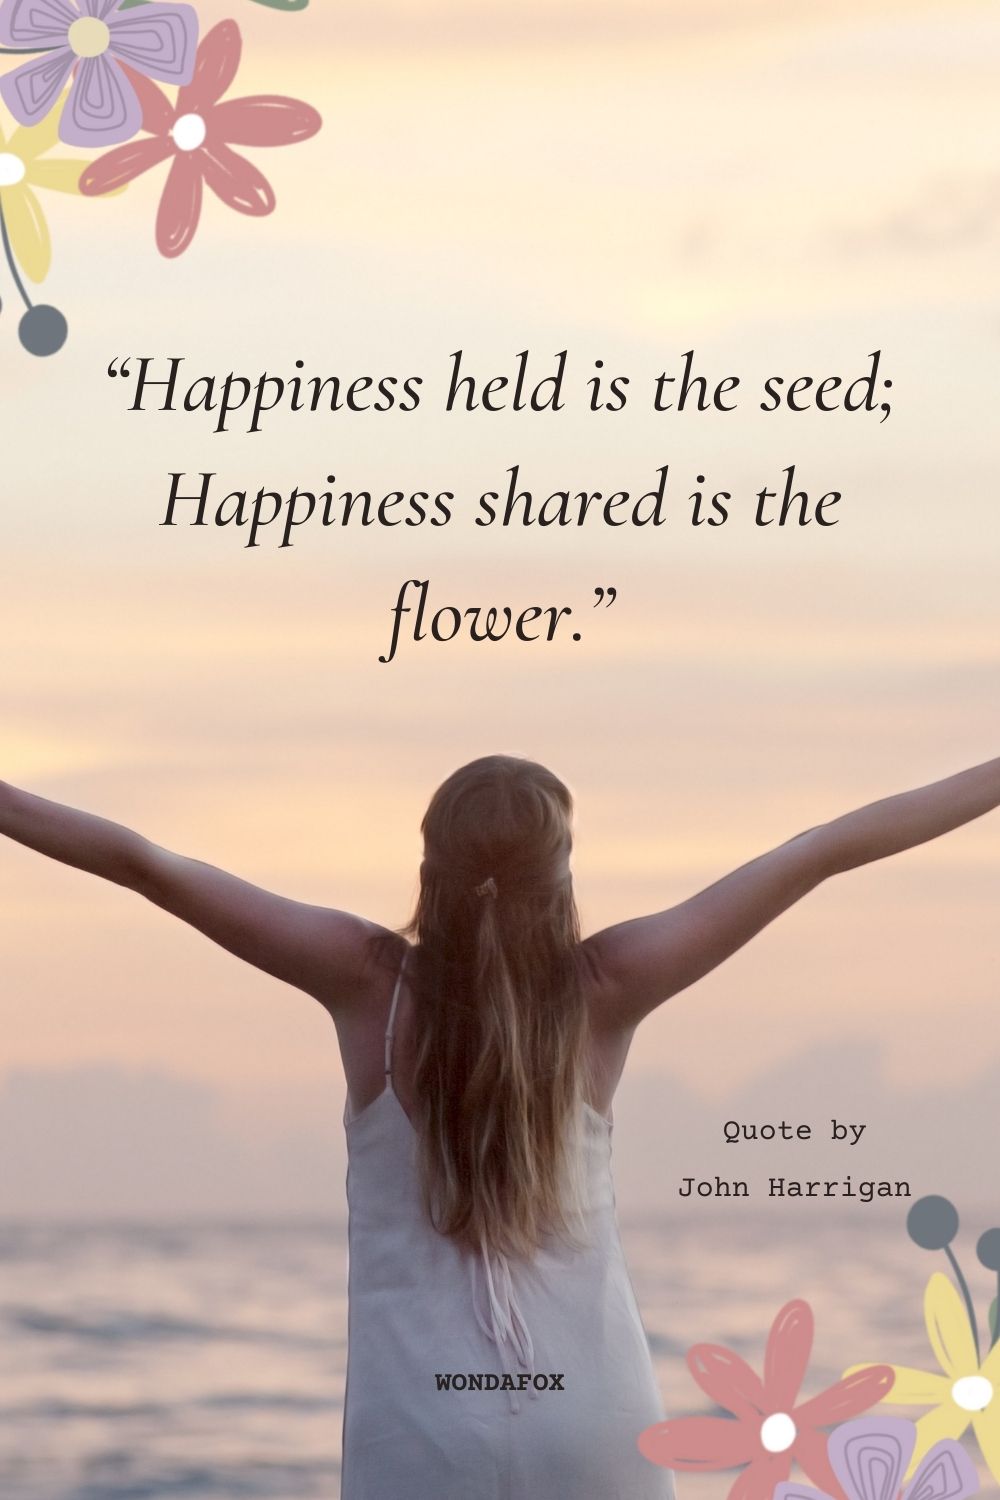 “Happiness held is the seed; Happiness shared is the flower.”
John Harrigan